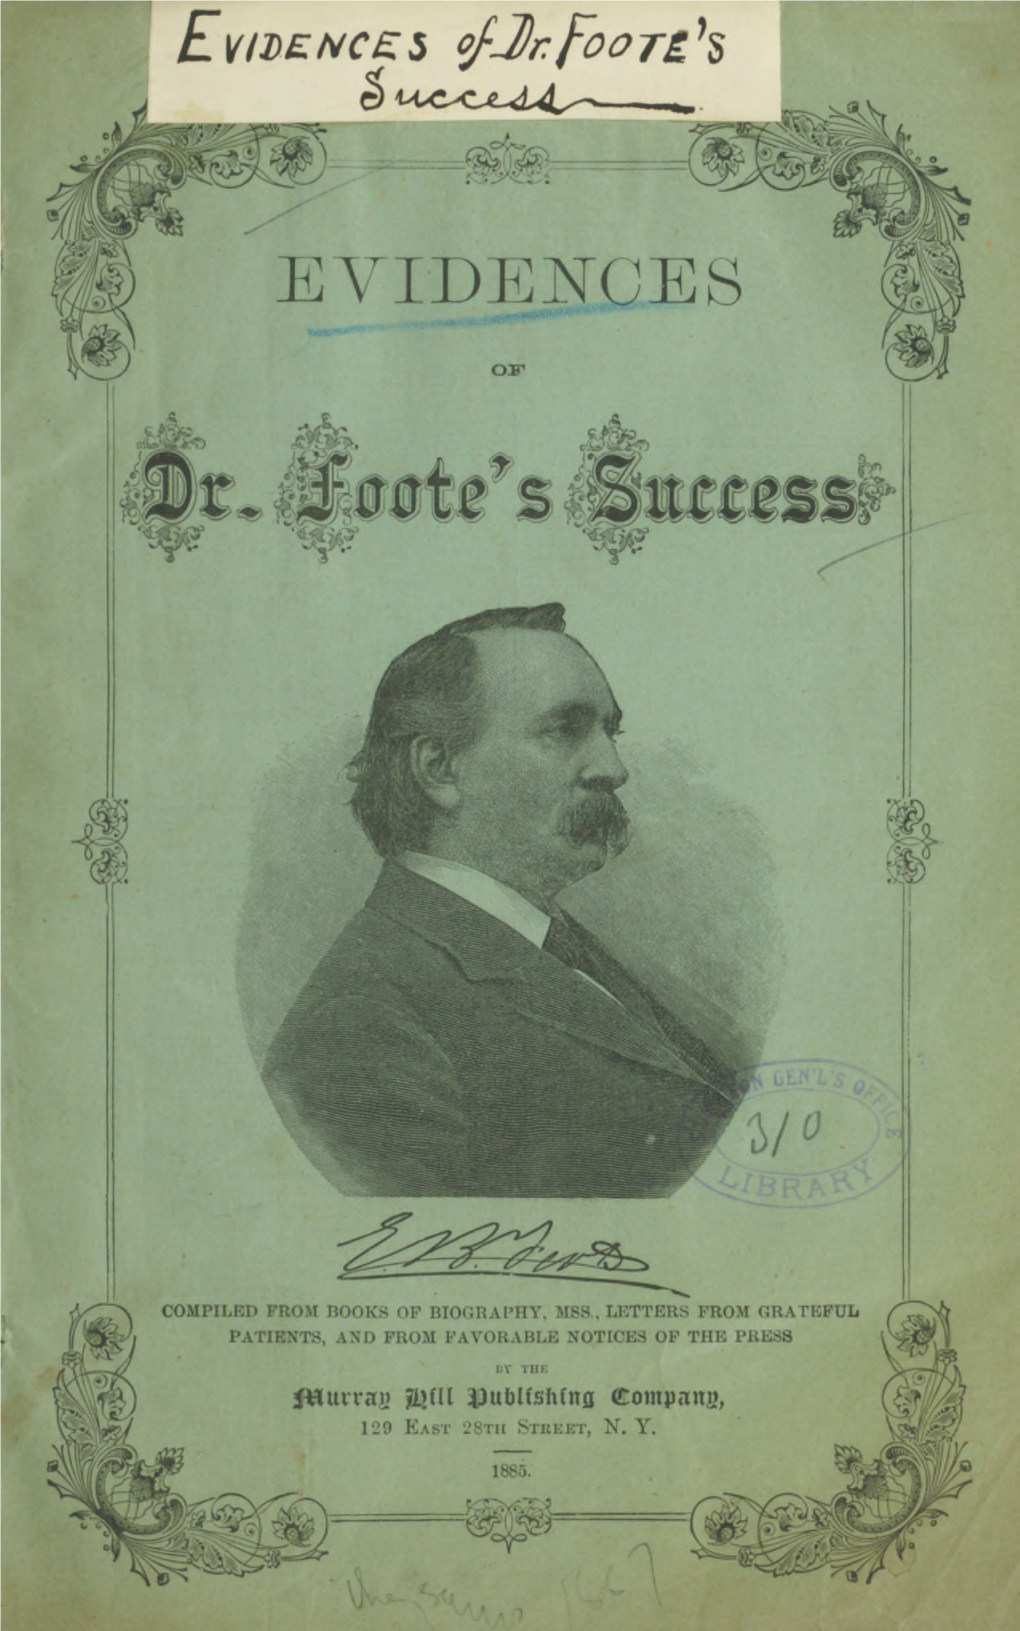 Evidences of Dr. Foote's Success